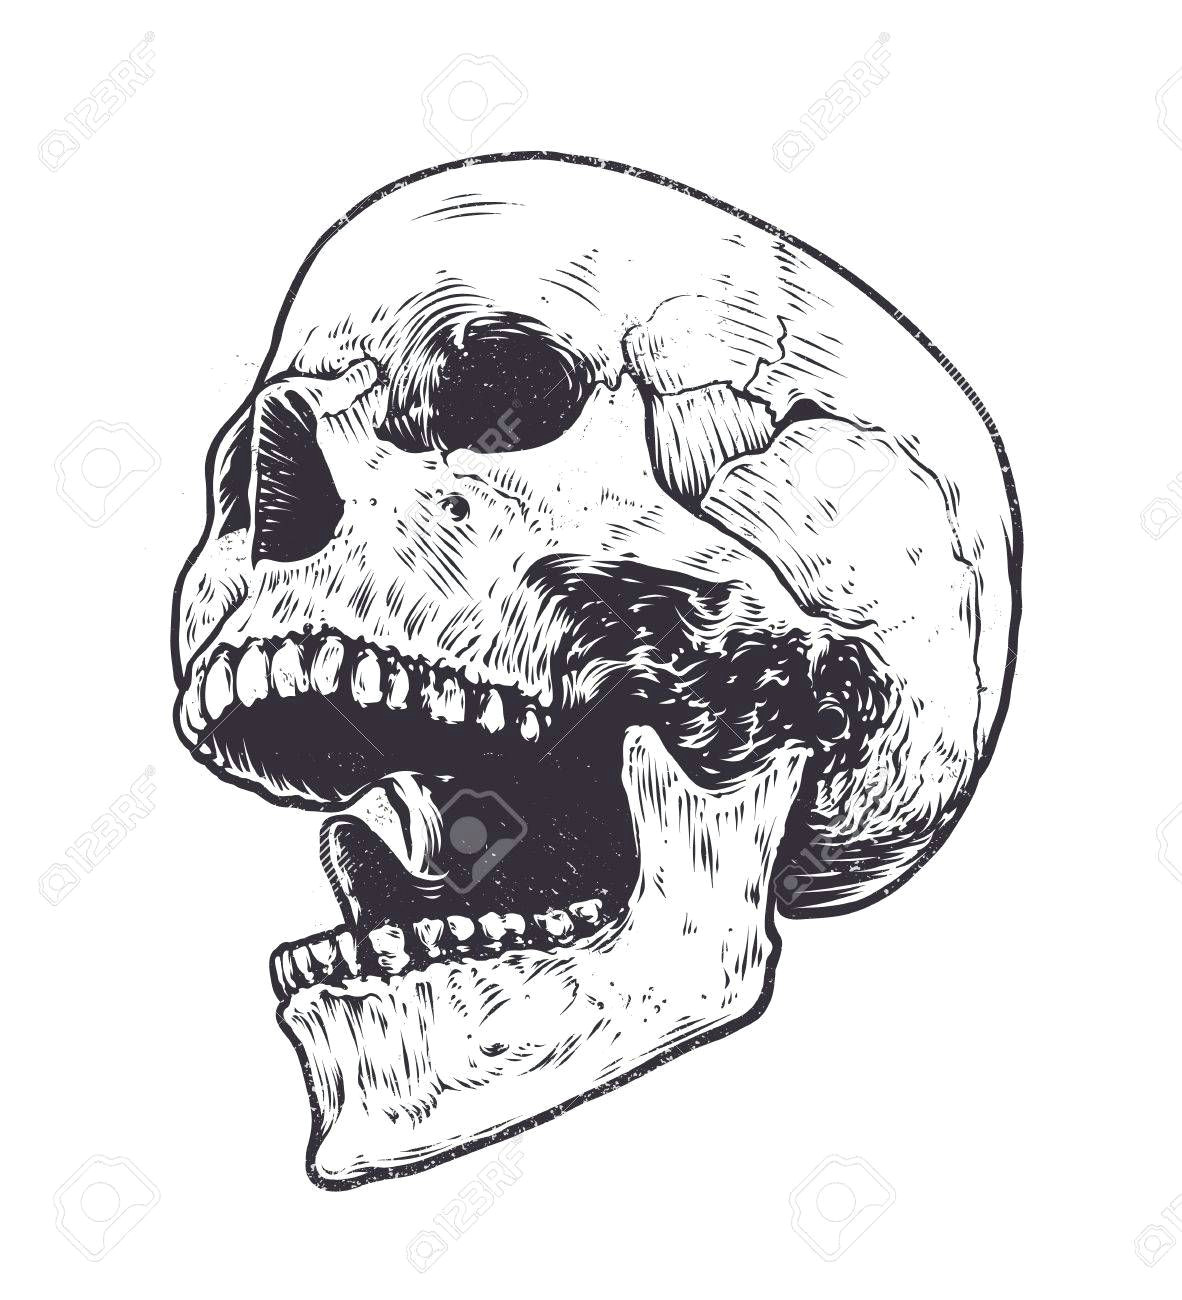 Skull Drawing Side Image Result for Skull Open Mouth Drawing Tattoo Projects